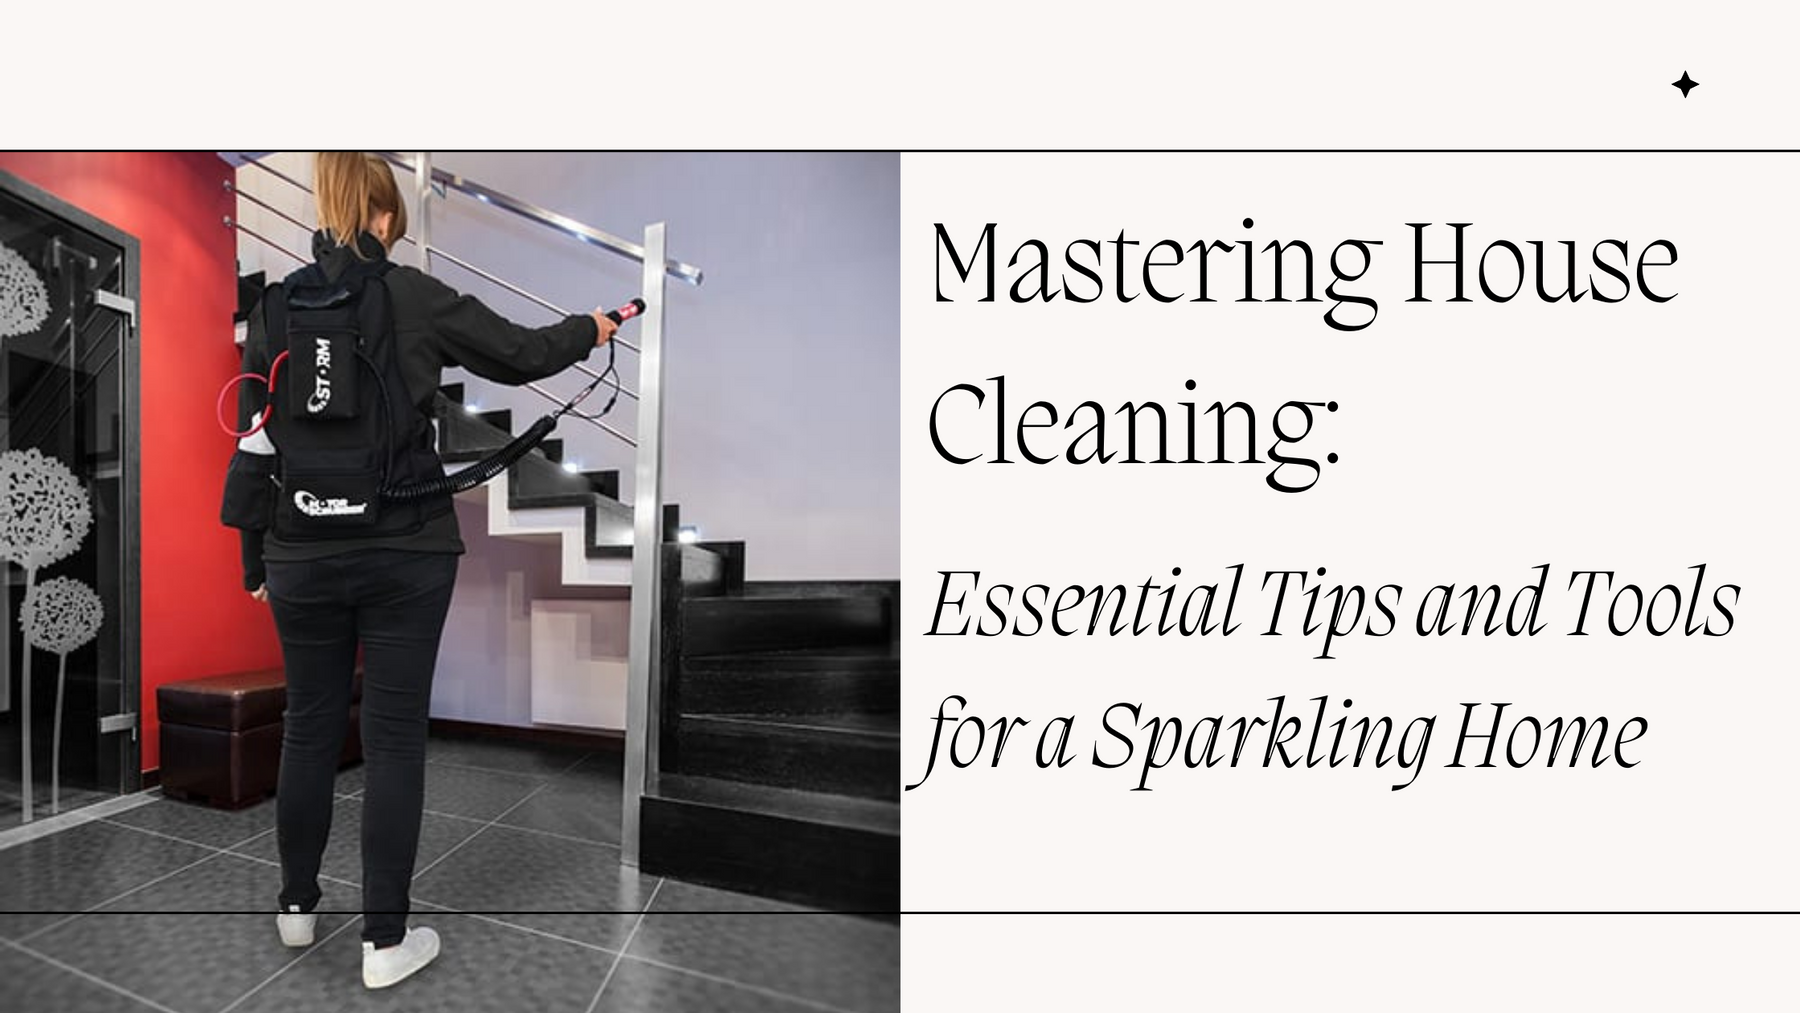 Mastering House Cleaning: Essential Tips and Tools for a Sparkling Home